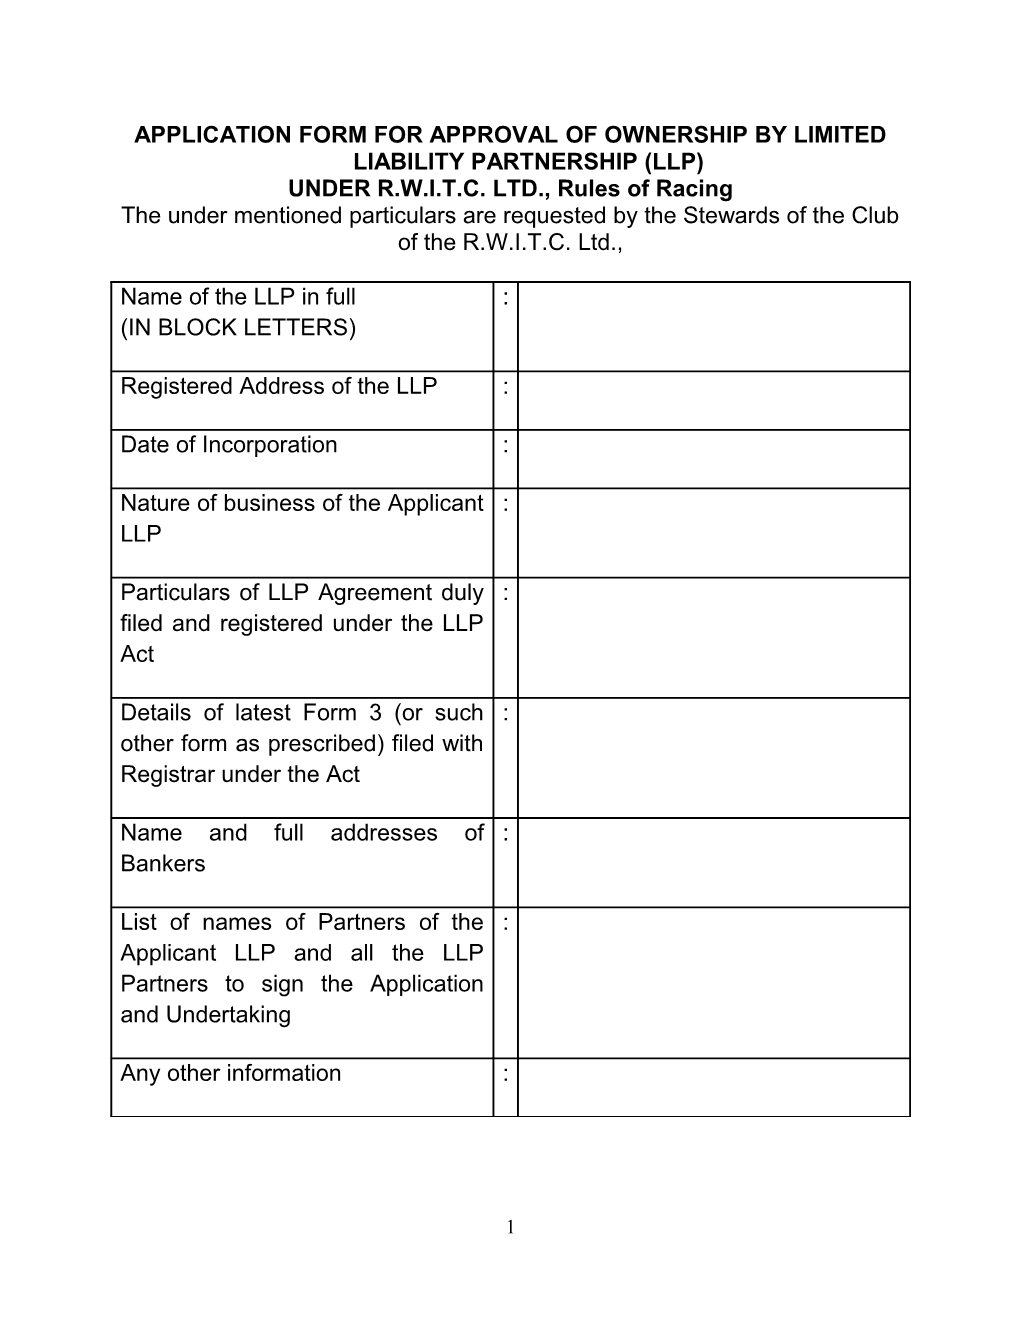 Application Form for Approval of Ownership by Limited Liability Partnership (Llp)